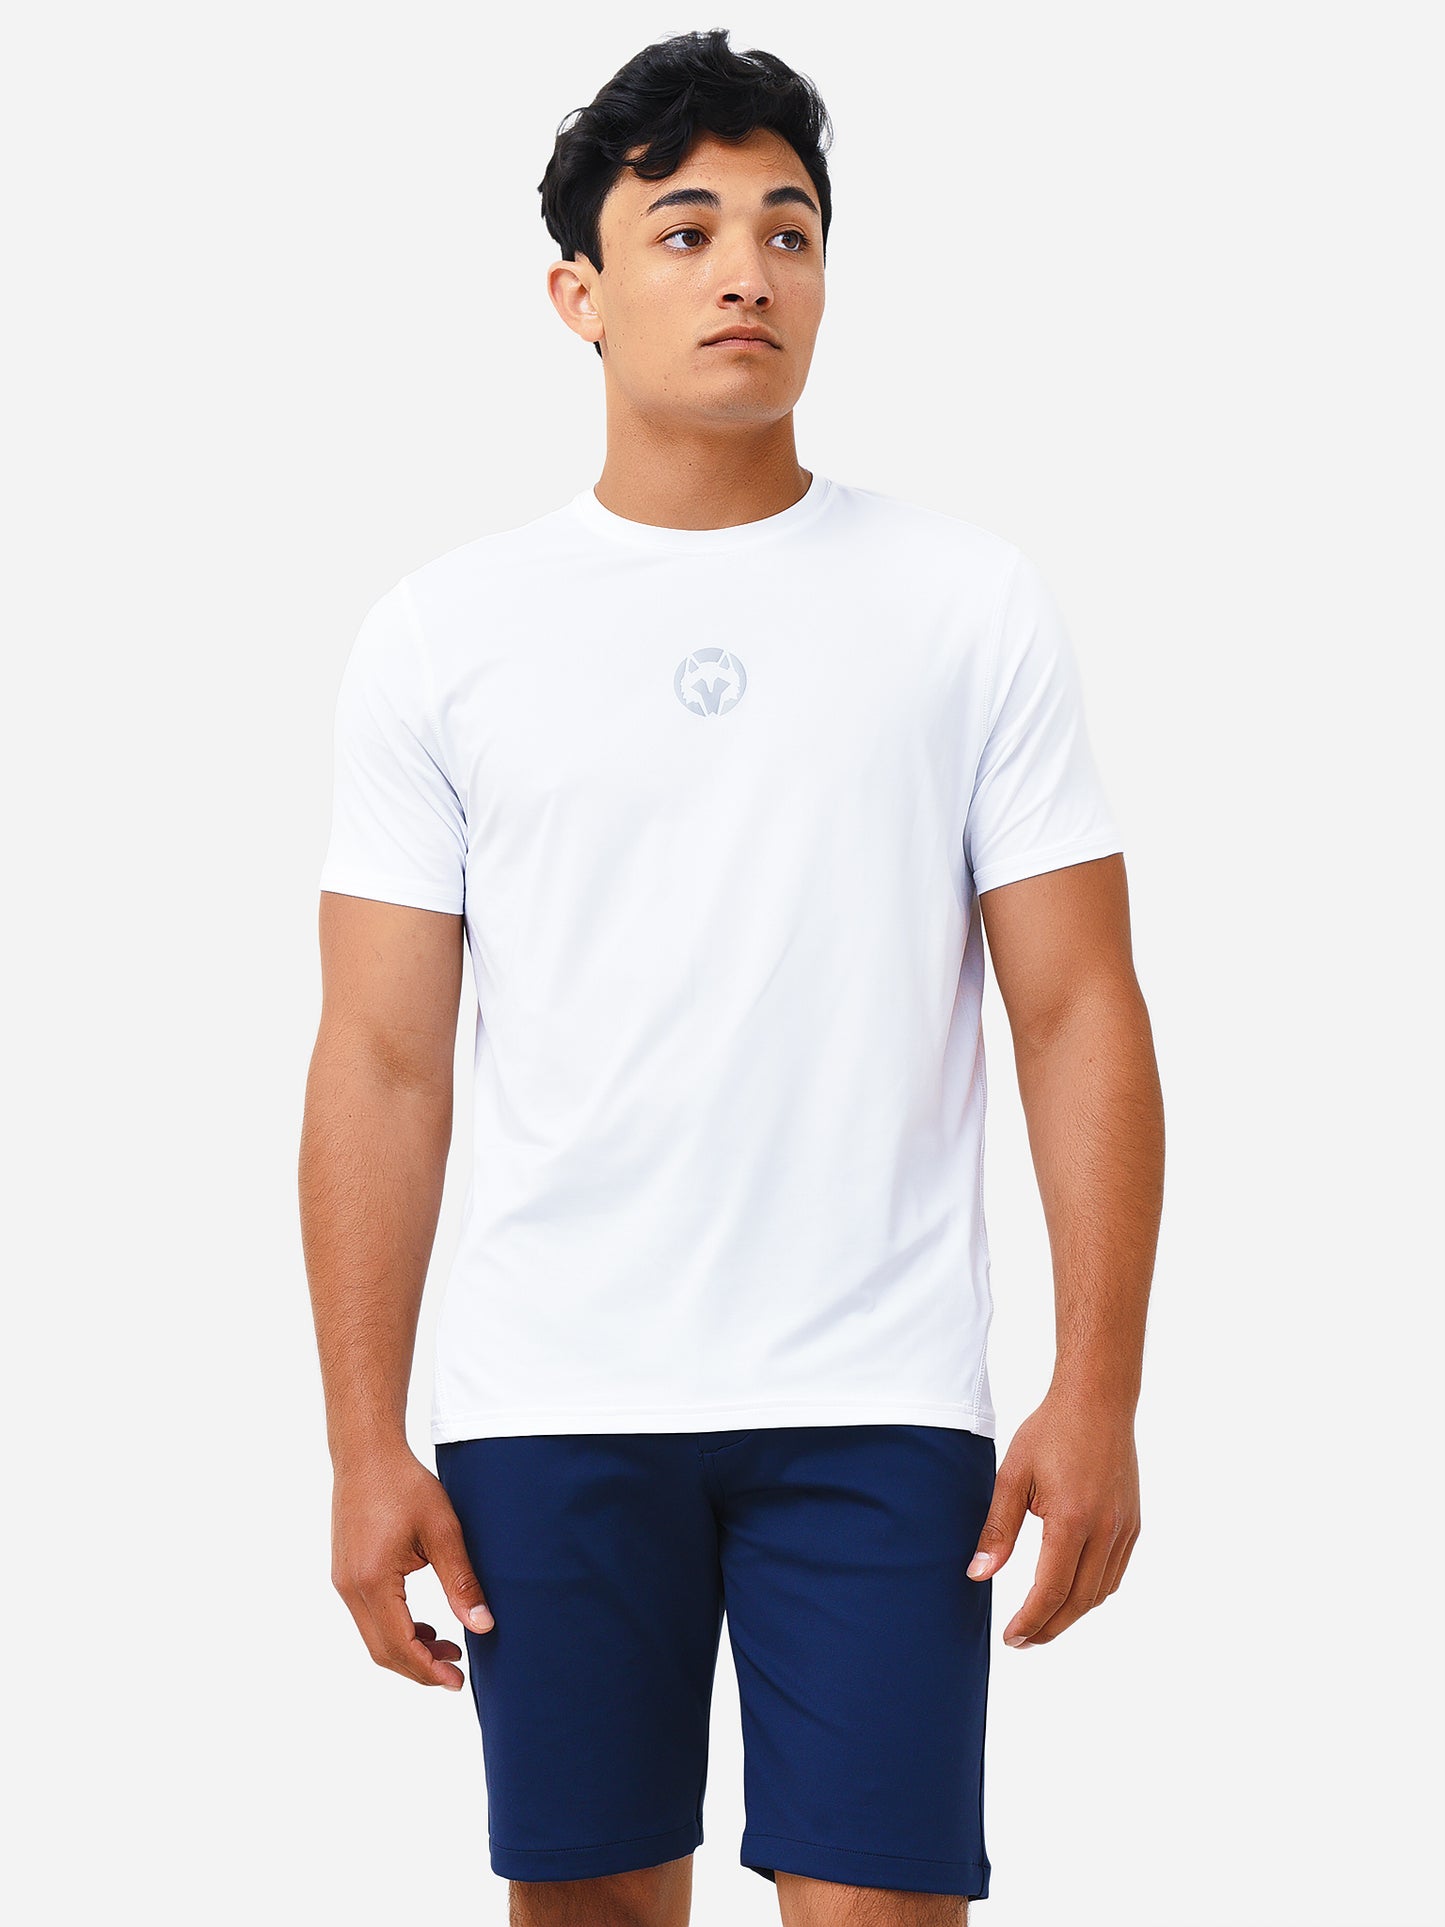 Greyson Men's Guide Back Court Tee